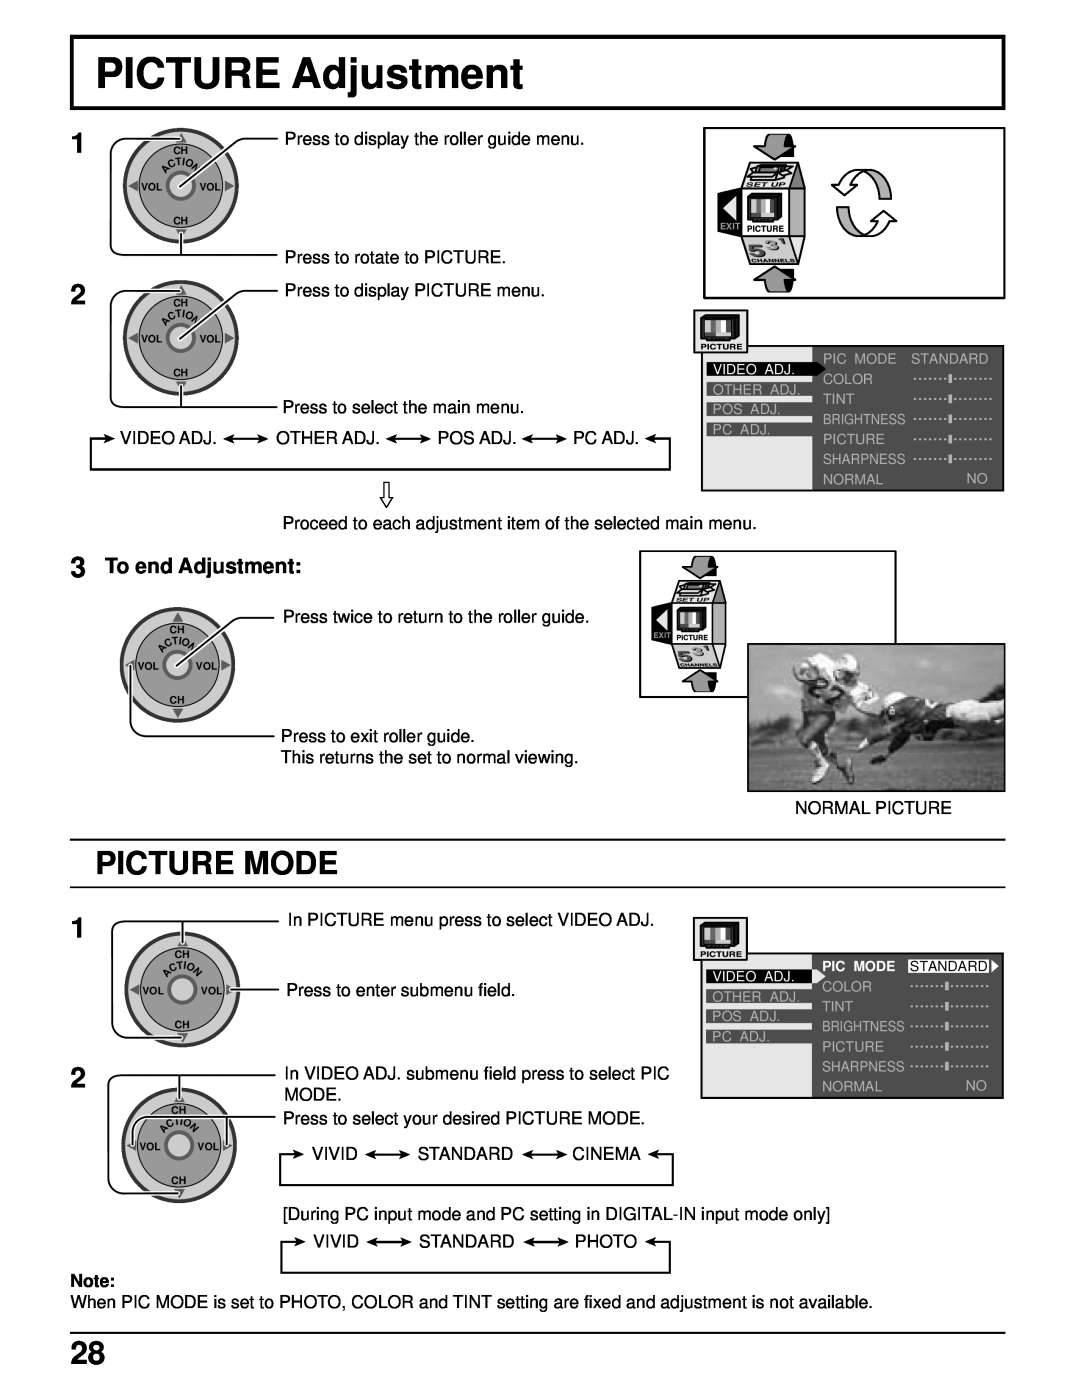 Panasonic PT 52DL52 manual PICTURE Adjustment, Picture Mode, To end Adjustment, Press to display the roller guide menu 